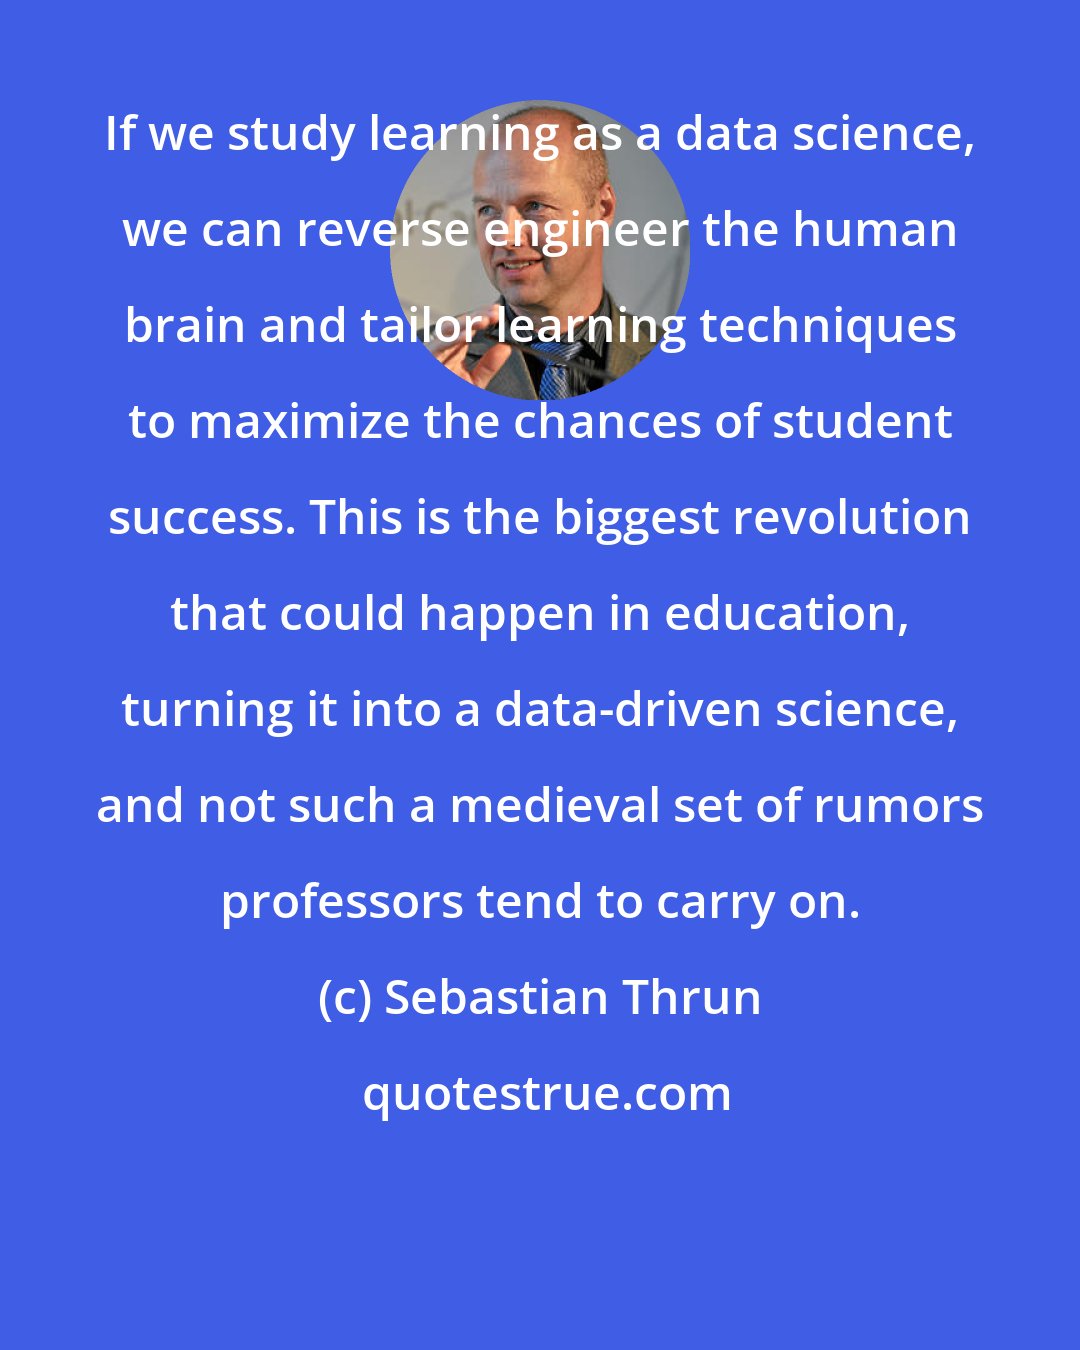 Sebastian Thrun: If we study learning as a data science, we can reverse engineer the human brain and tailor learning techniques to maximize the chances of student success. This is the biggest revolution that could happen in education, turning it into a data-driven science, and not such a medieval set of rumors professors tend to carry on.